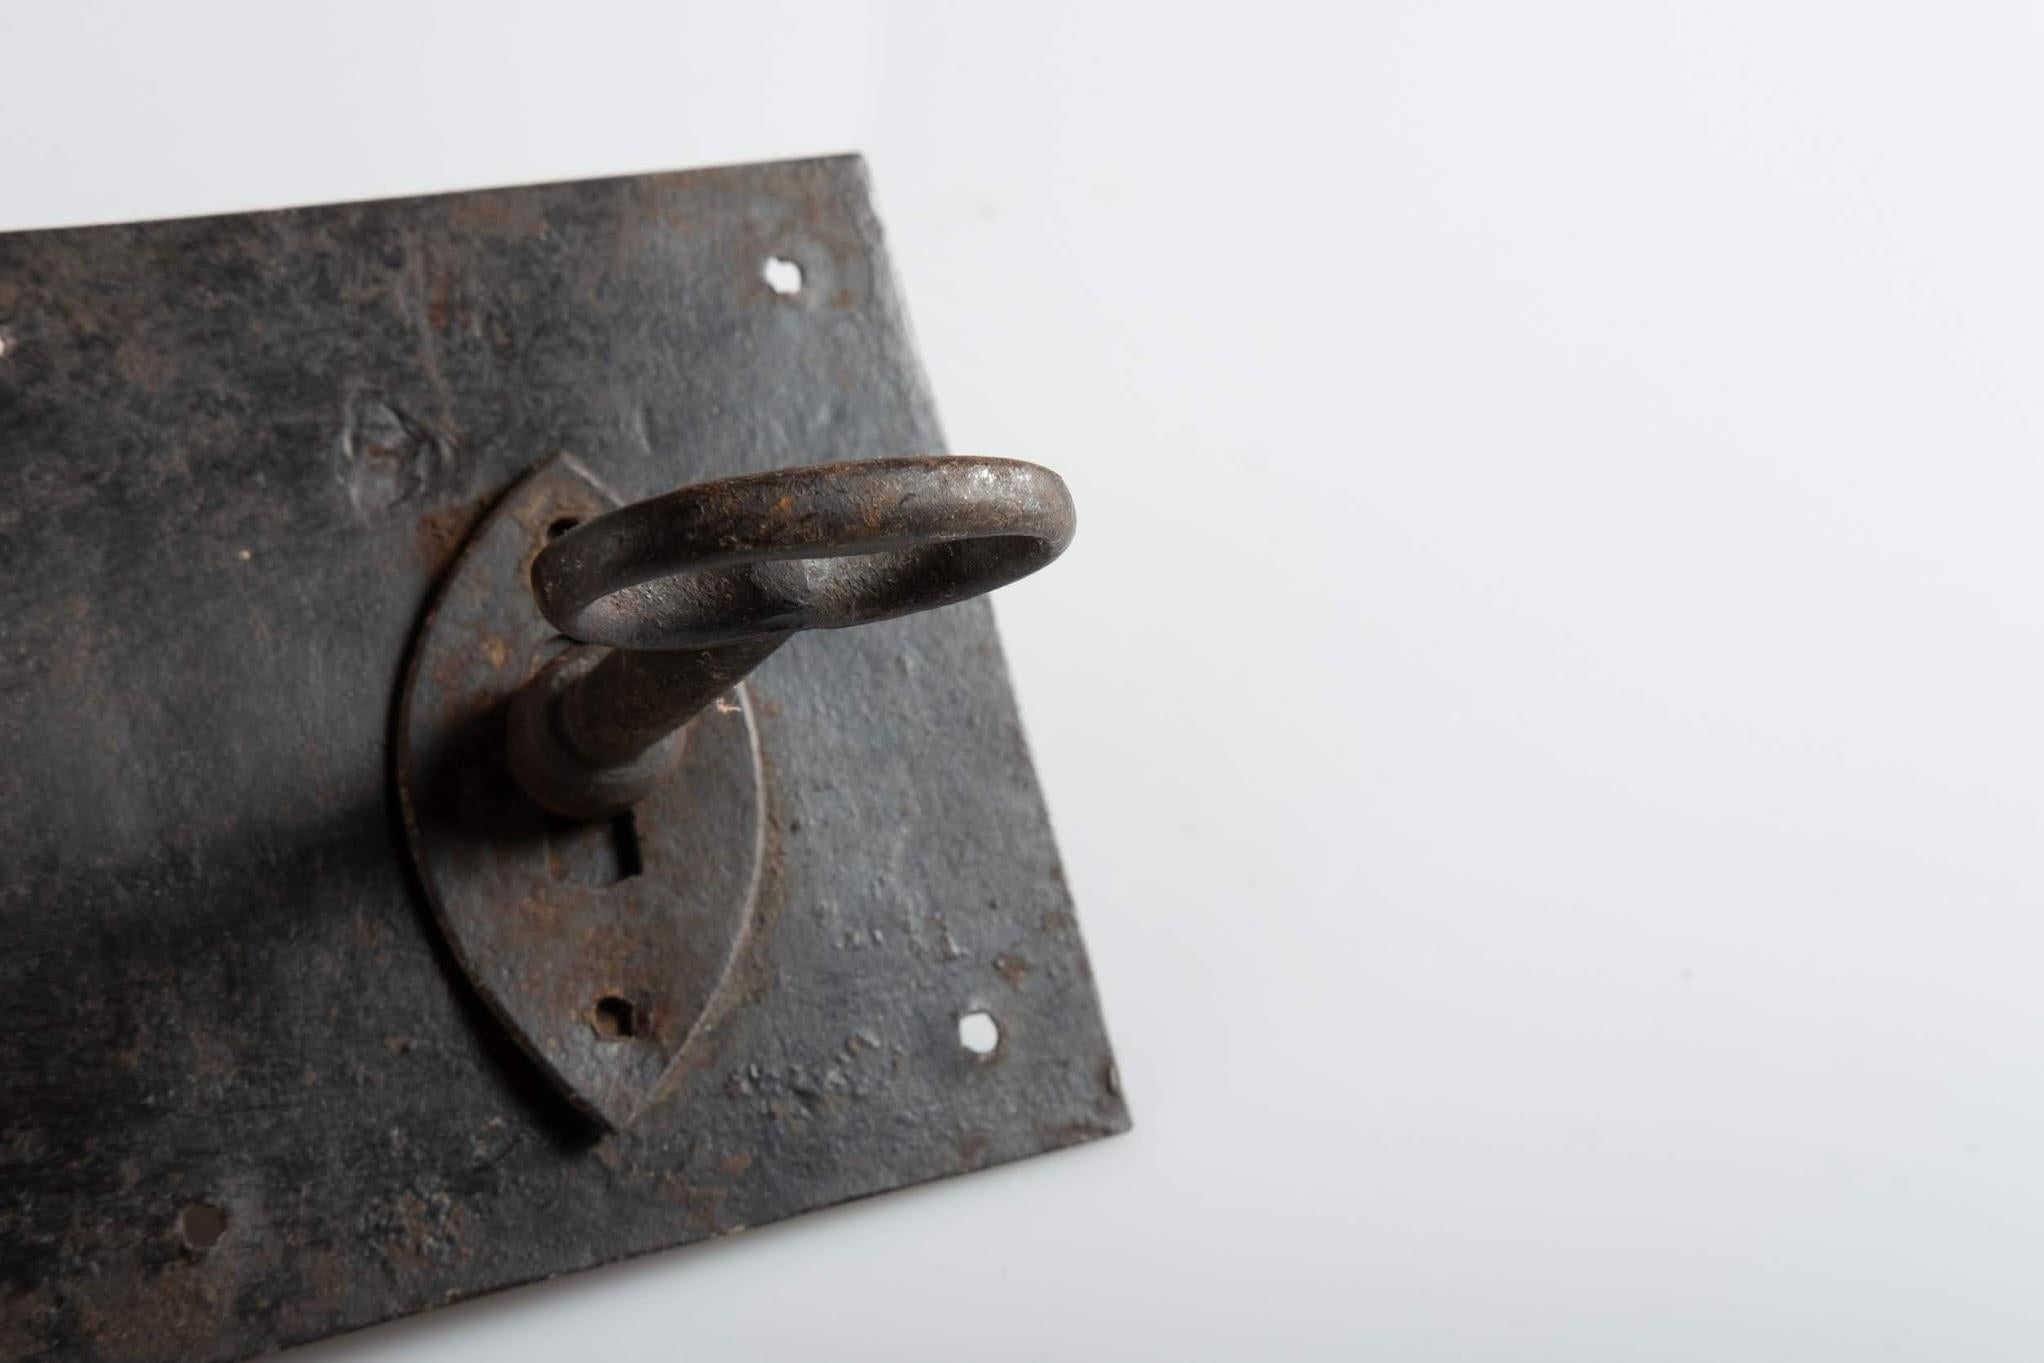 Primitive Handwrought Iron Latch, Italy, circa 1700 In Good Condition For Sale In New York, NY